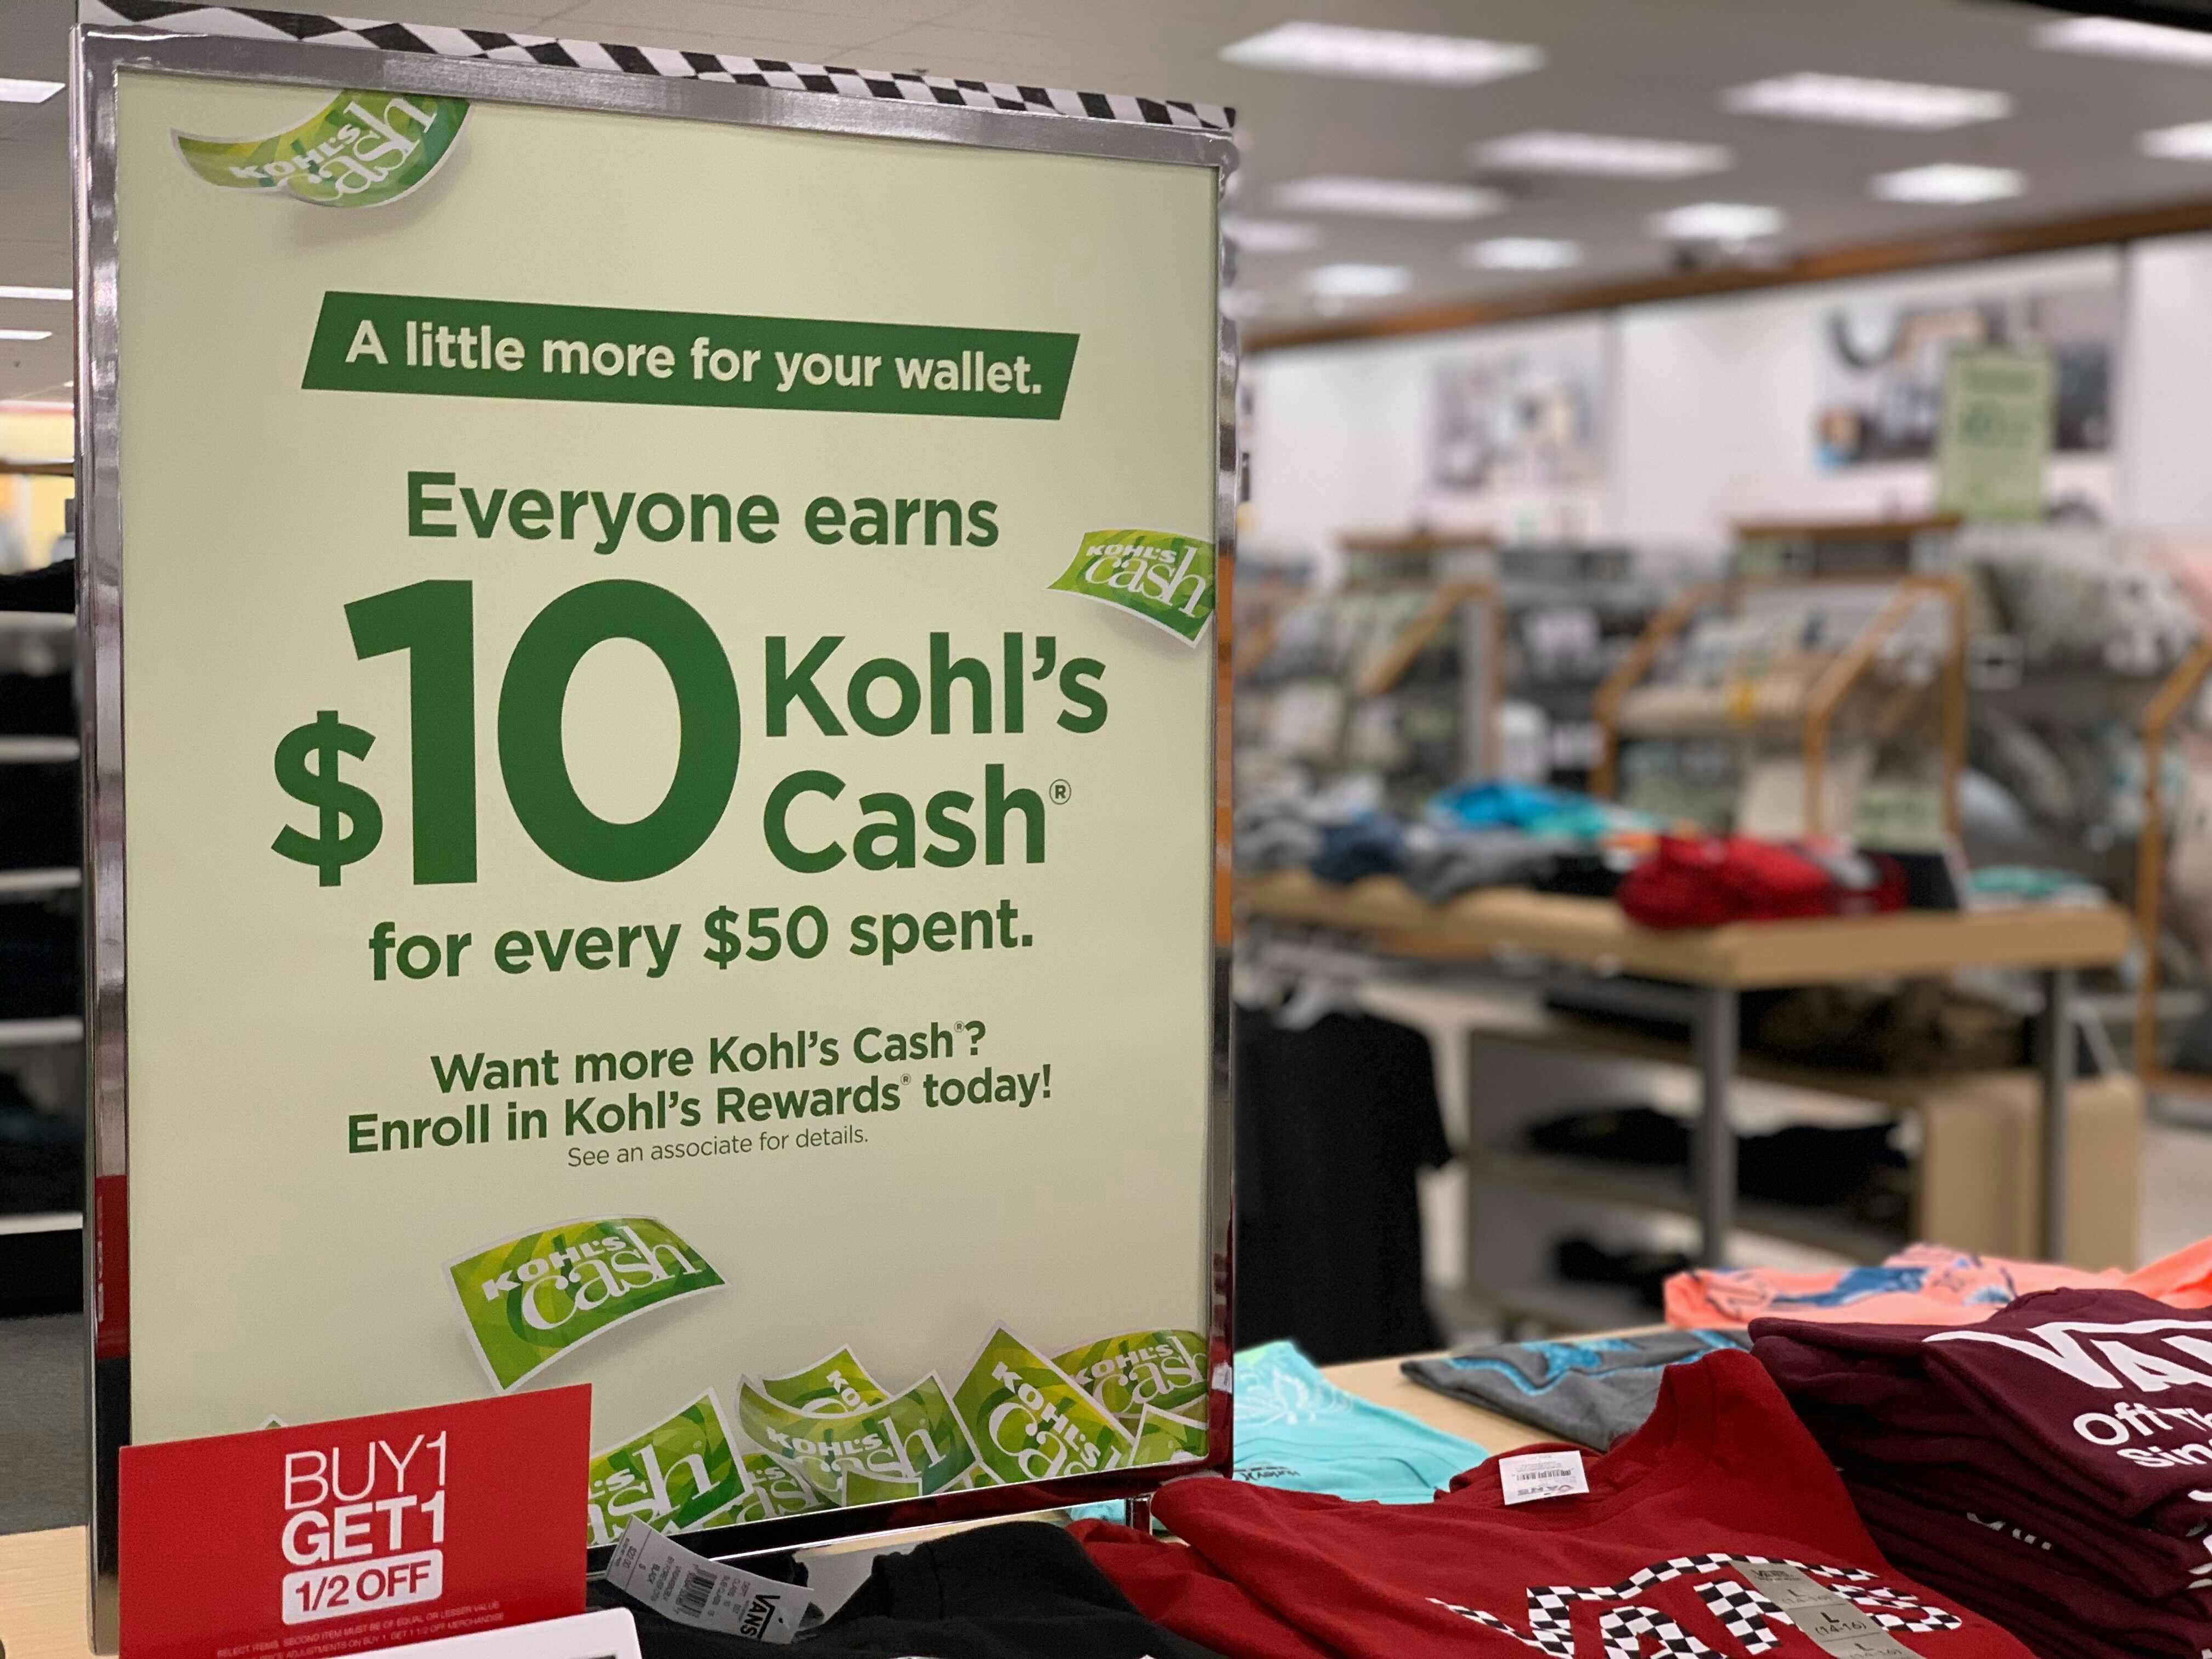 Kohls in store sign that reads Everyone earns $10 Kohls Cash for every $50 spent near a buy 1 get one ½ off sign on a tee shirt display stand